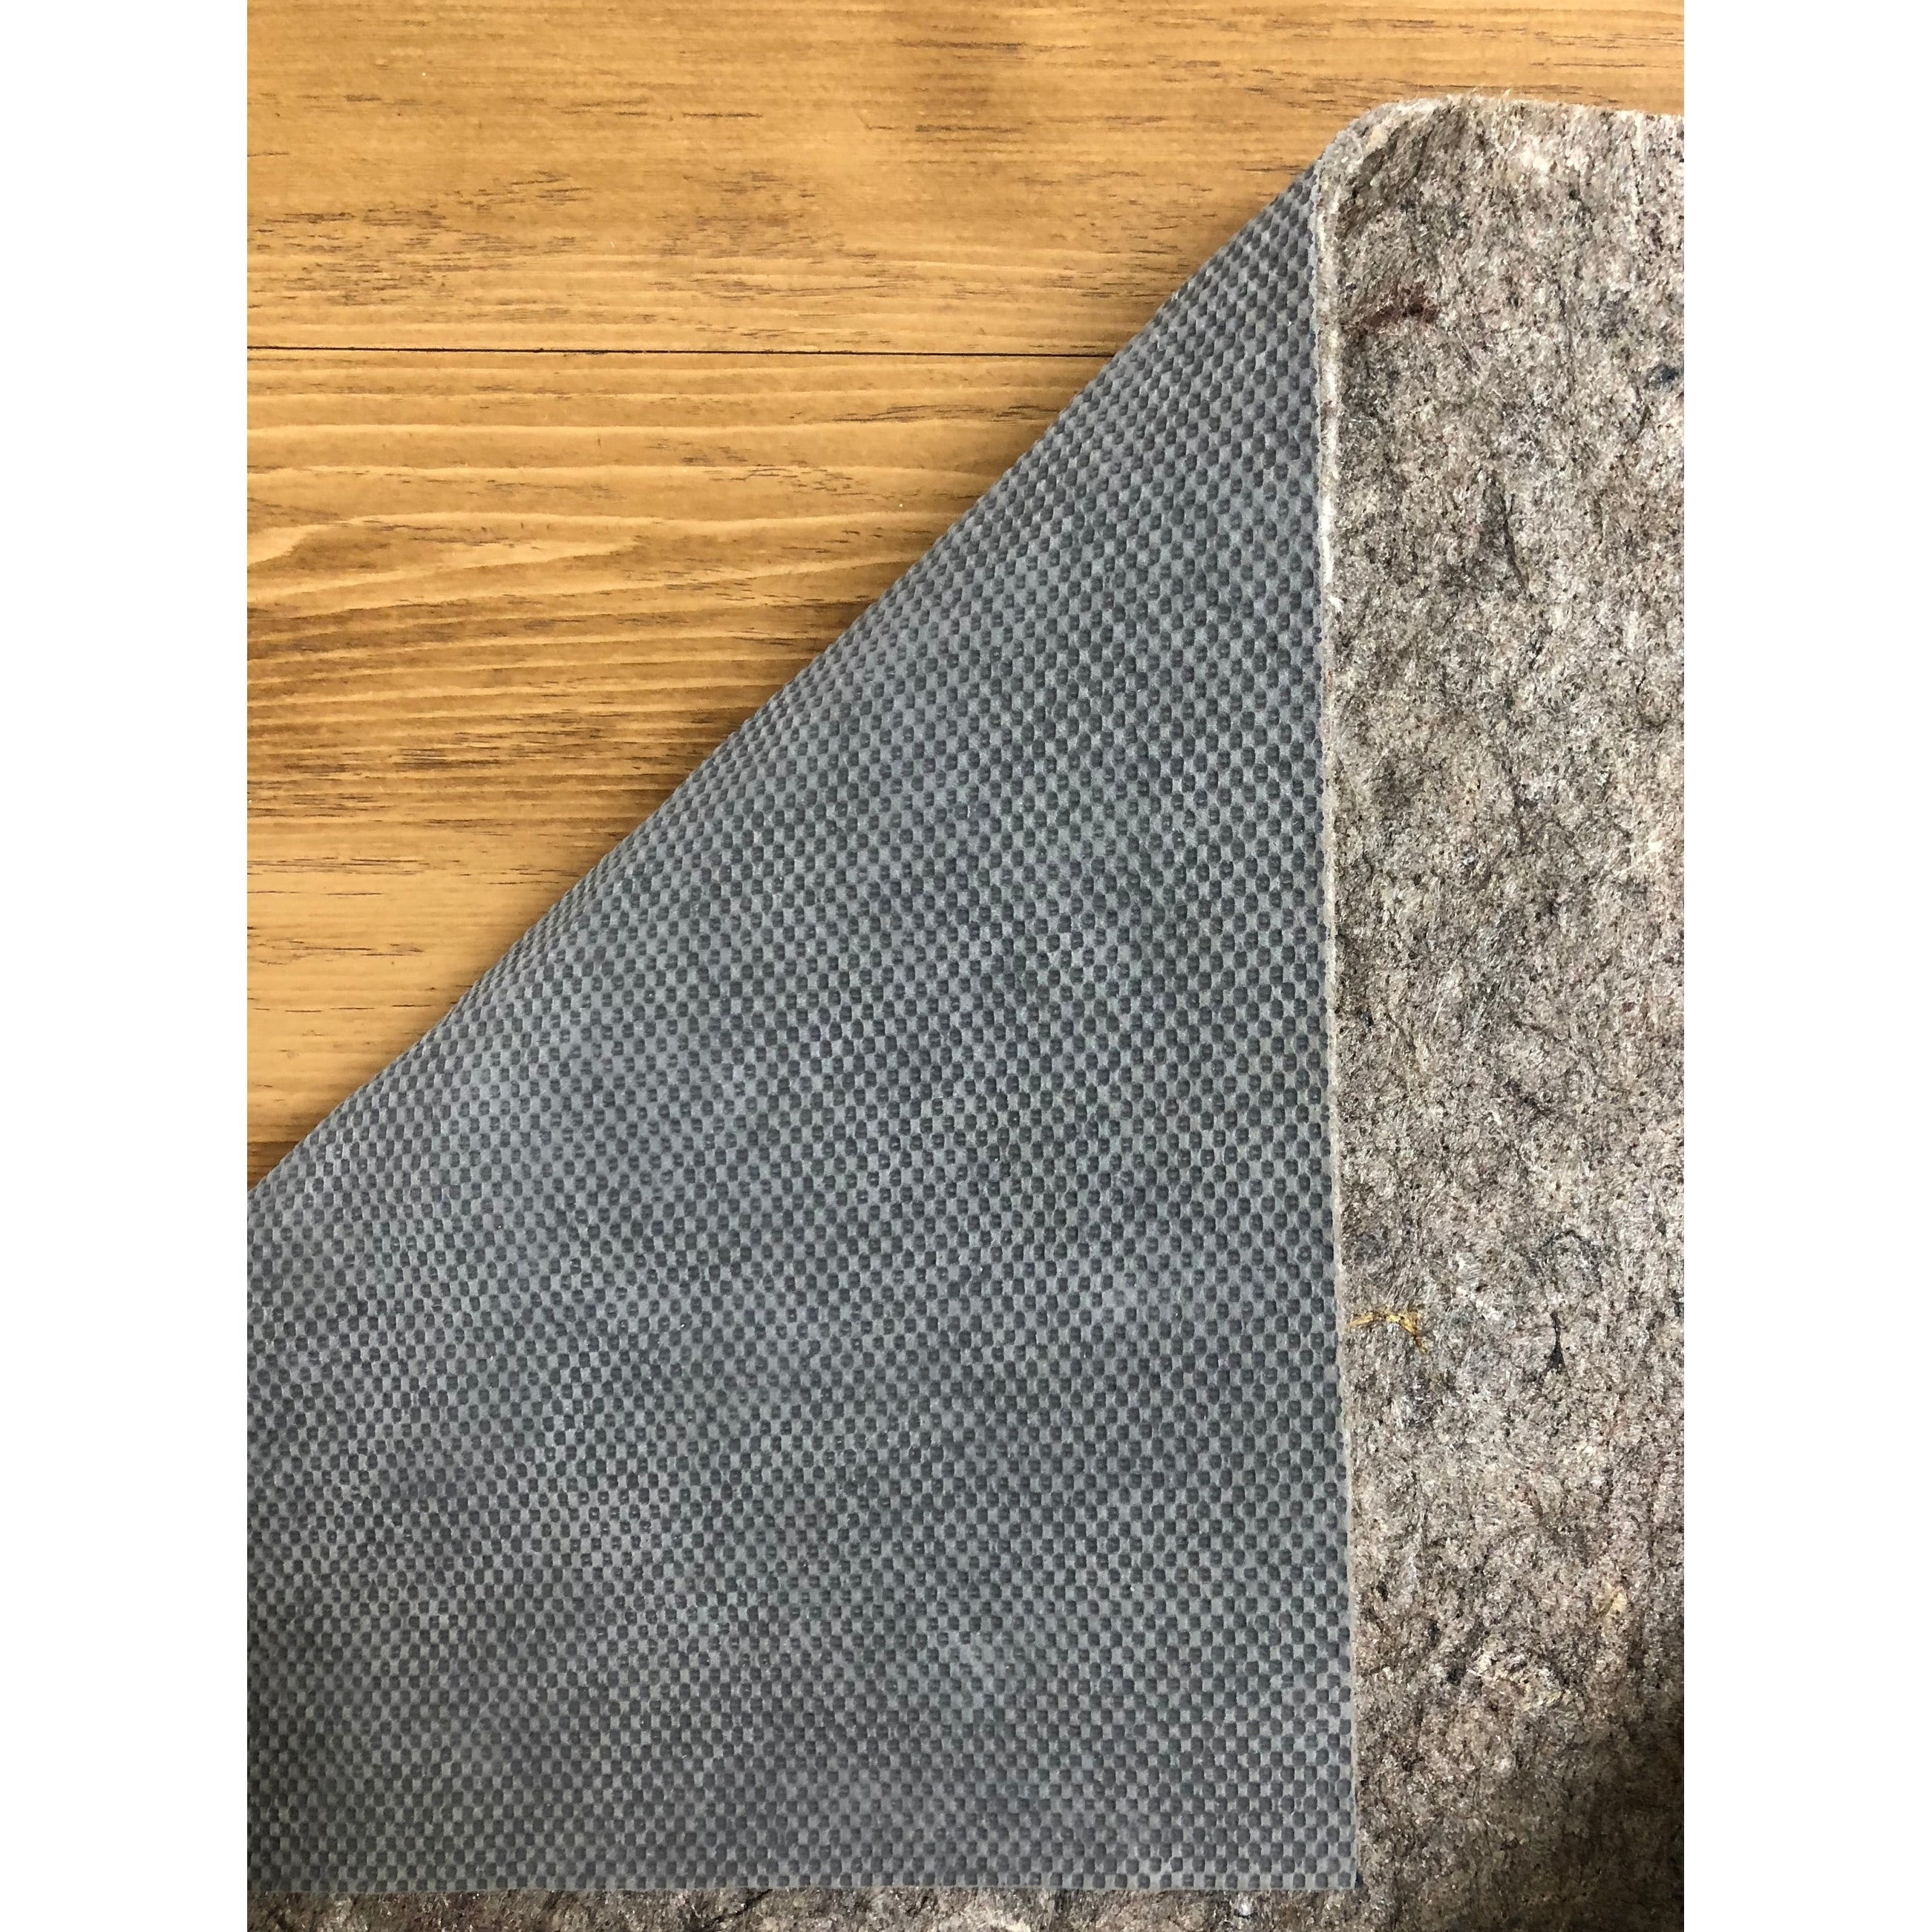 https://ak1.ostkcdn.com/images/products/21828208/Rug-Pad-Special-Grip-Rubber-Back-Felted-Non-Skid-Padding-For-Area-Rugs-8-5cb64a16-9221-41a4-8ab7-ea14a2d5aeb9.jpg